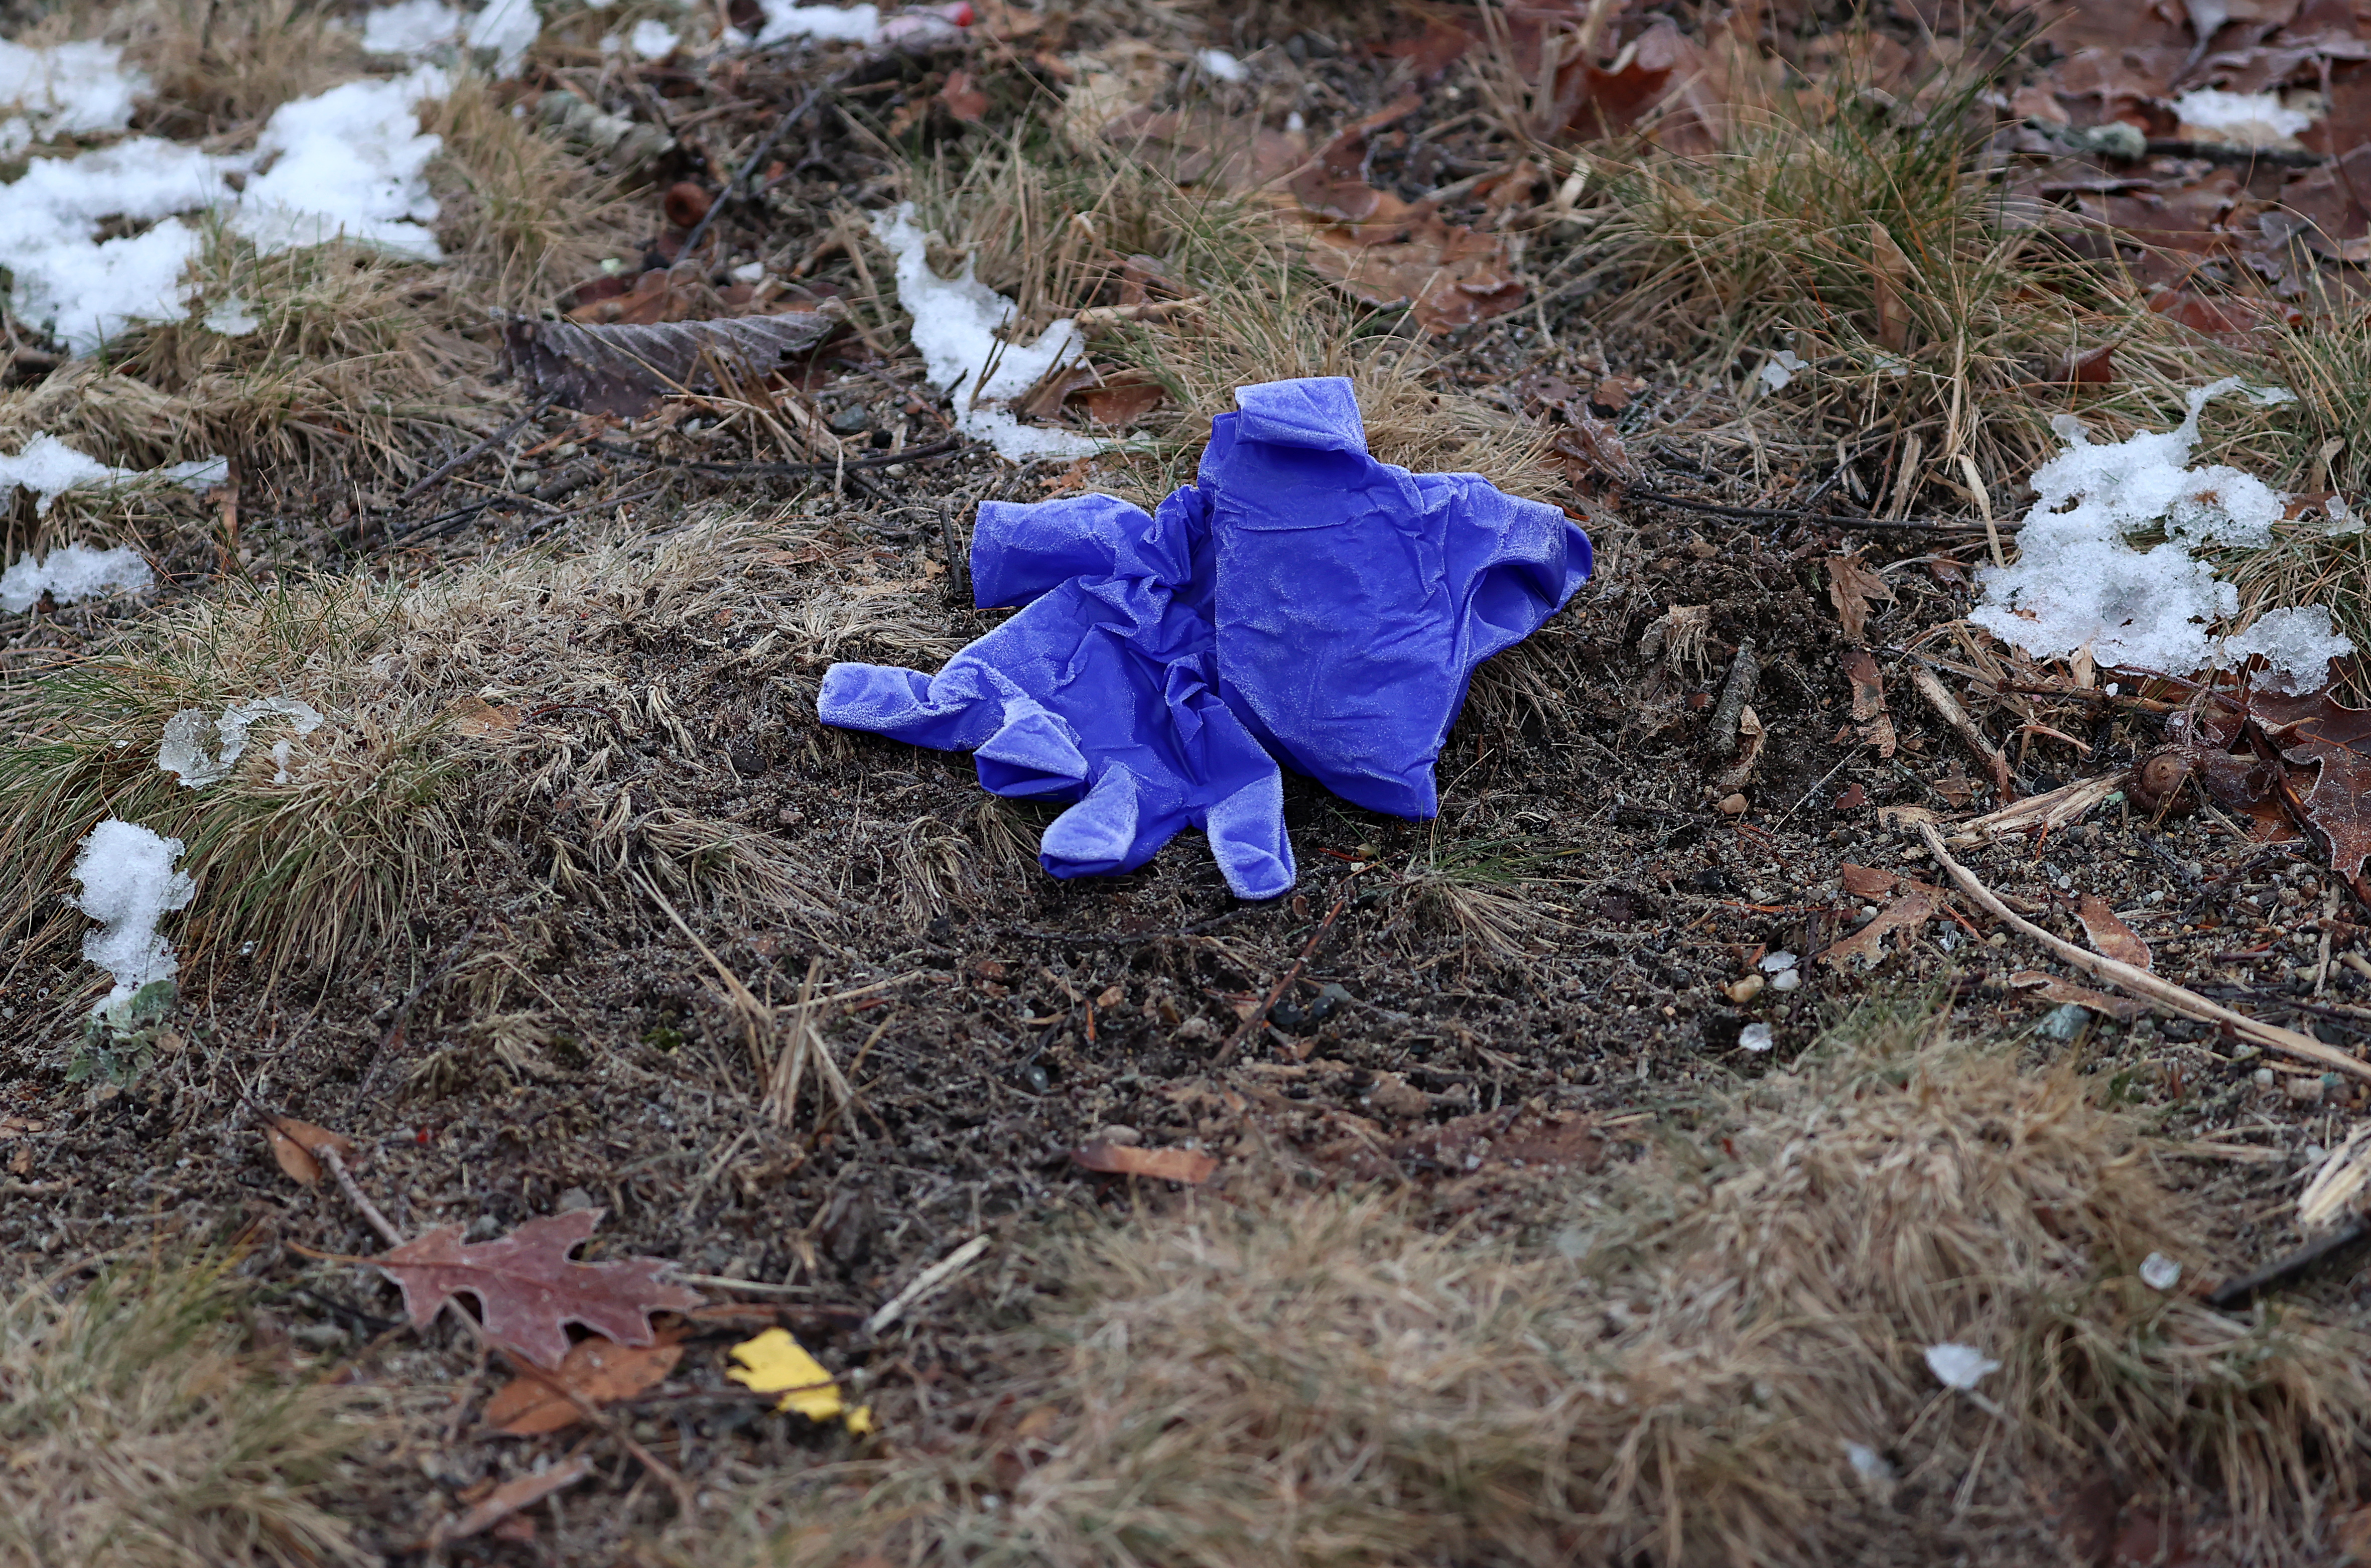 The bodies of the two deceased children were discovered in the house by the Police, as reported by a man who called the fire and police to the residence. It was reported that a woman who had attempted to kill herself was called to the home by the man. EMTs discarded gloves on Summer Street, Duxbury, MA, on January 25.